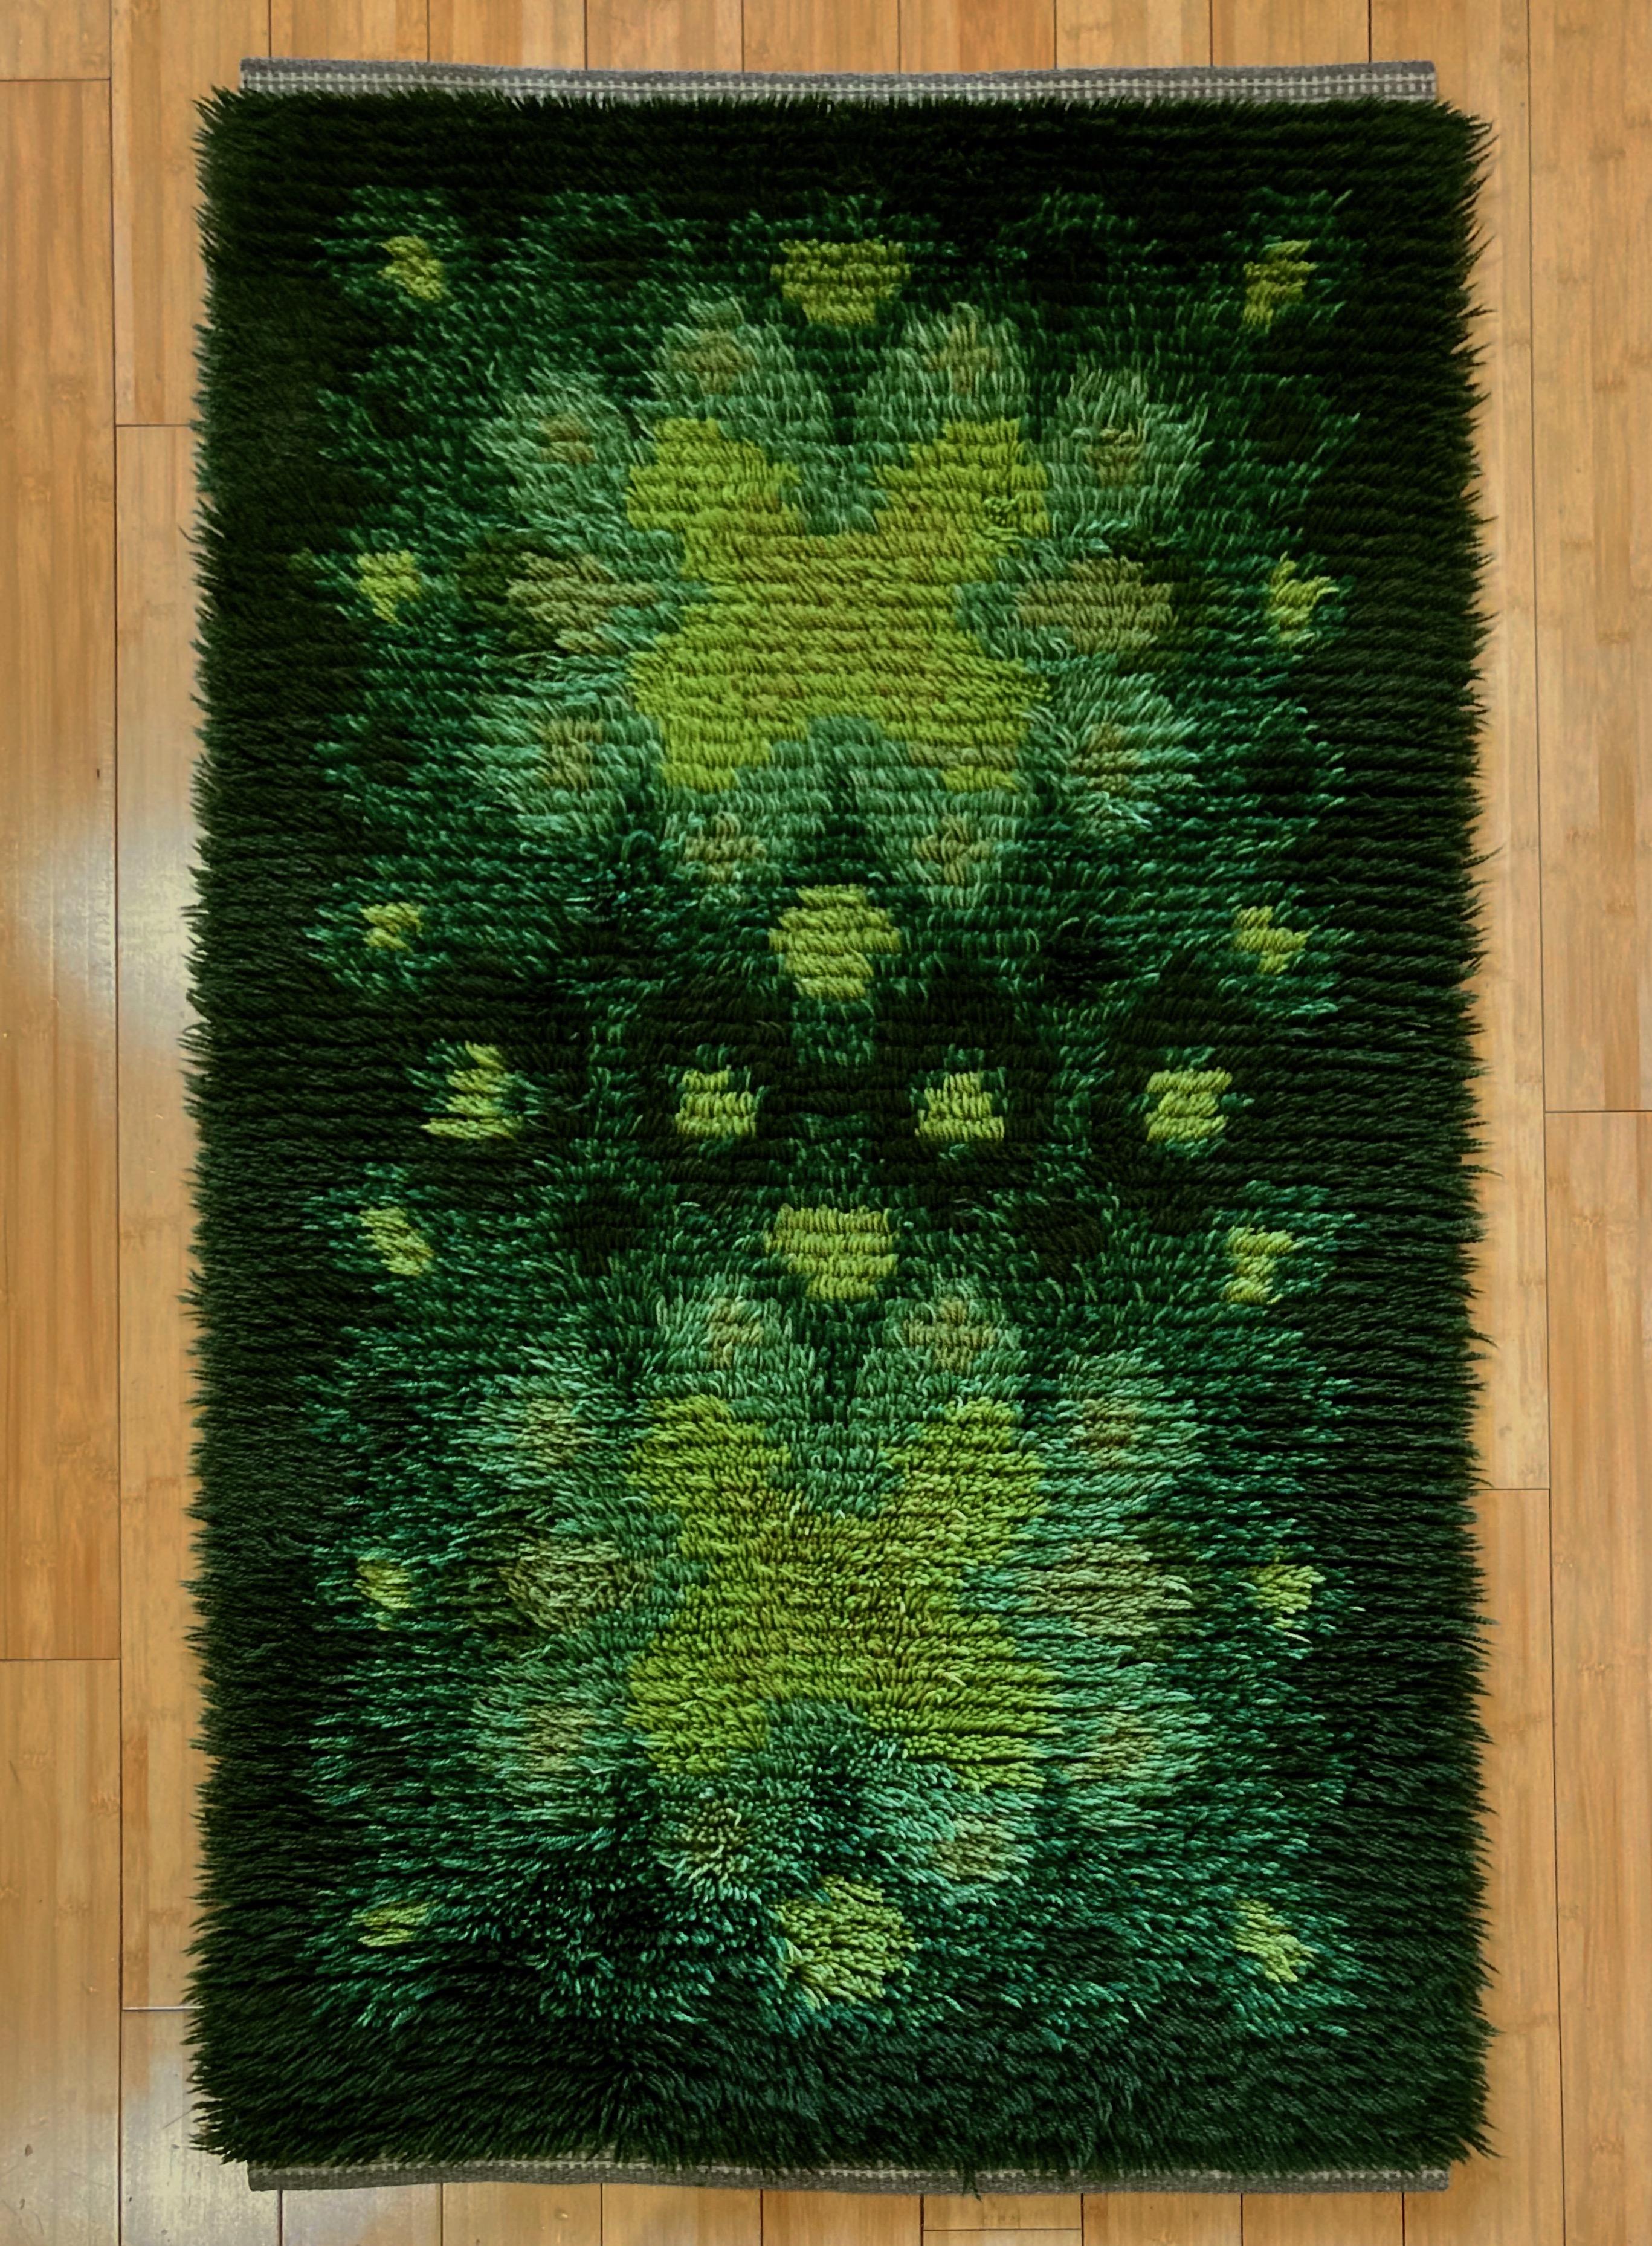 A vintage high pile Scandinavian rya rug crafted of hand knotted wool in many shades of green, dating circa 1960s. This midcentury rya is a soft and cozy accent for the floor but could be slung over a chair or hung on the wall as textile artwork.